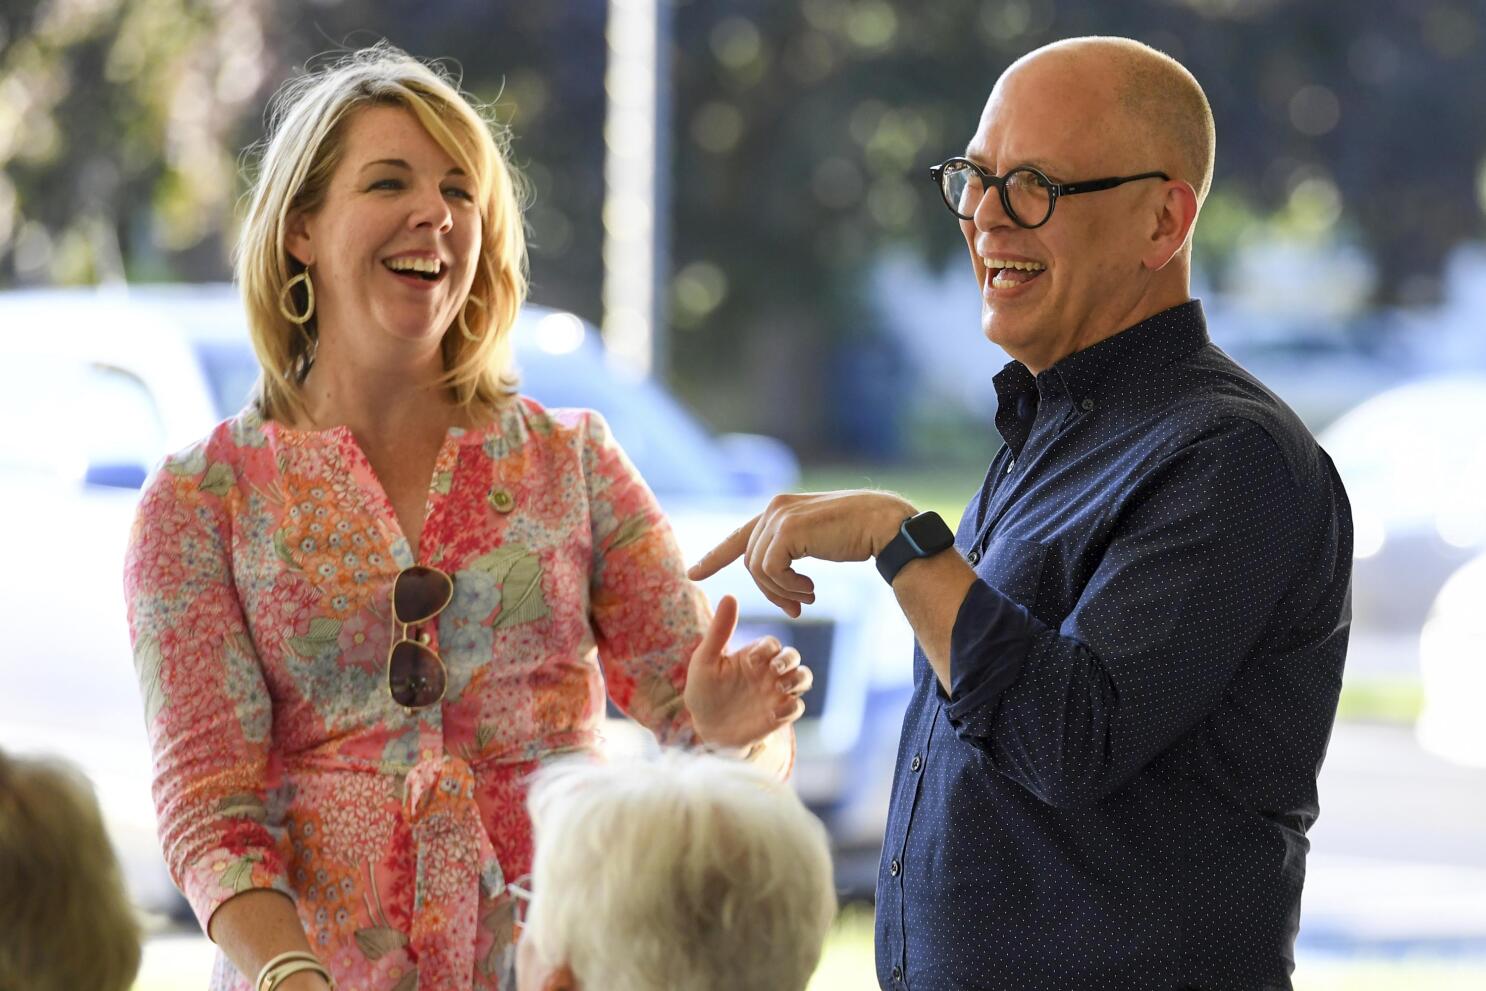 Why Jim Obergefell Is Running for Office After Same-Sex Marriage SCOTUS Win